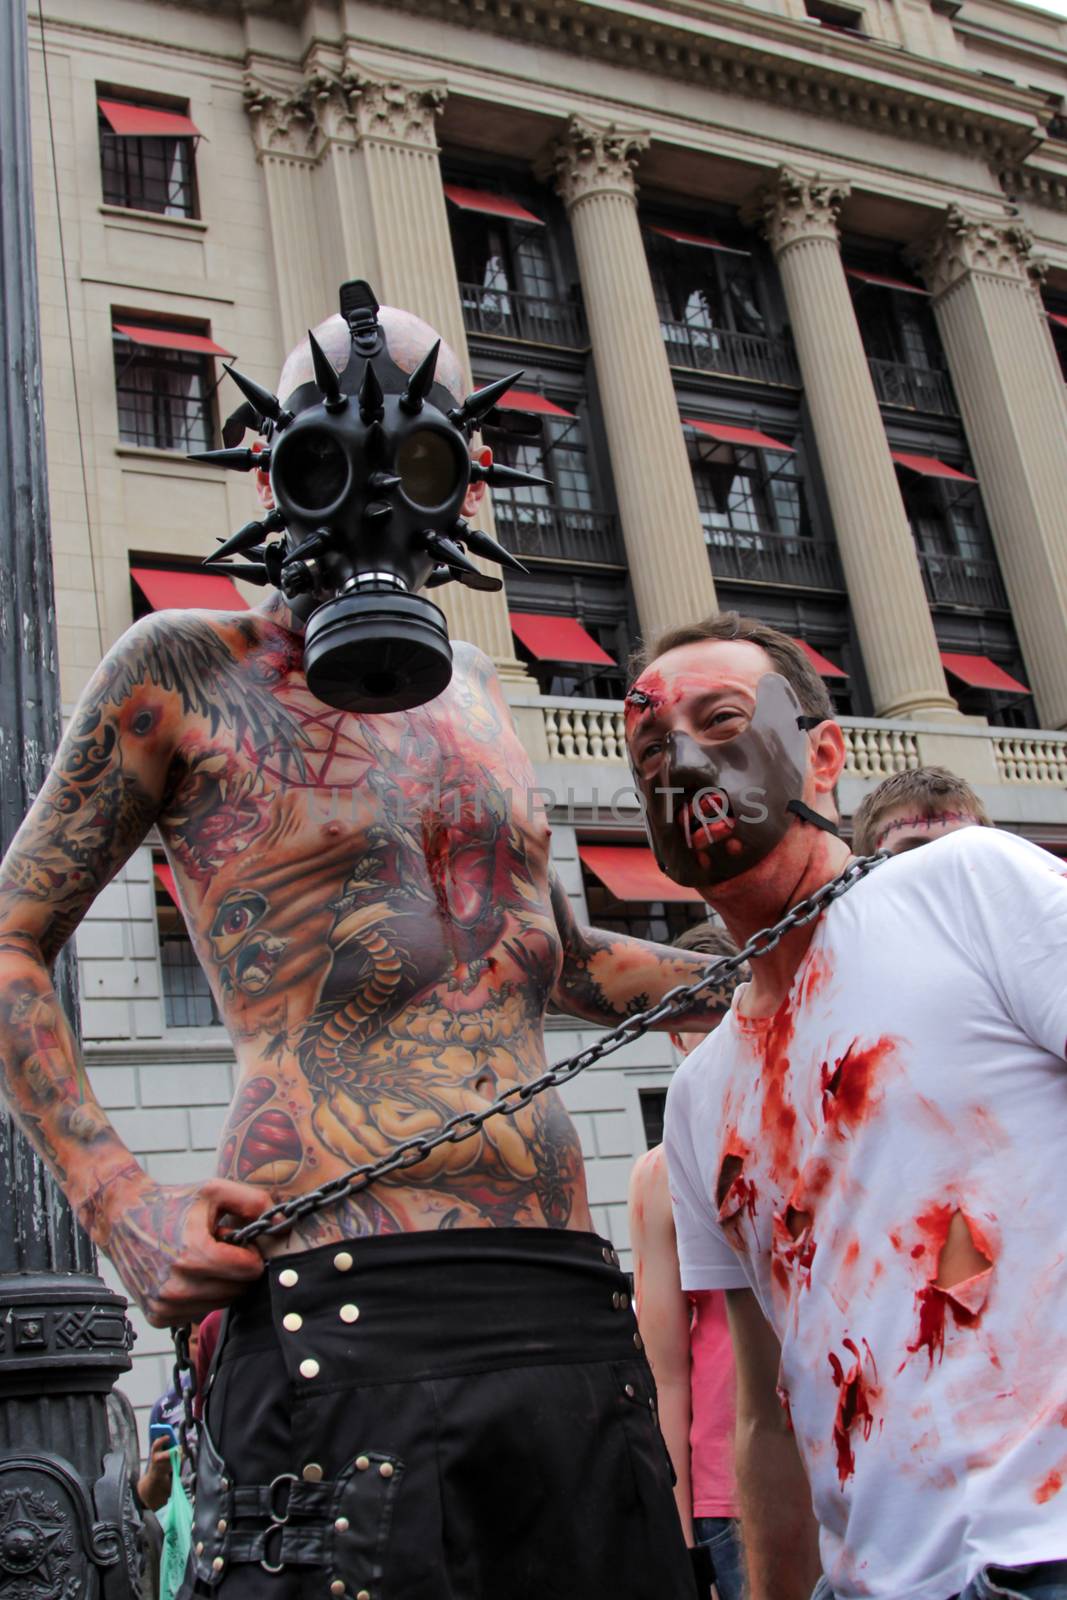 Guys in costumes in Zombie Walk Sao Paulo by marphotography